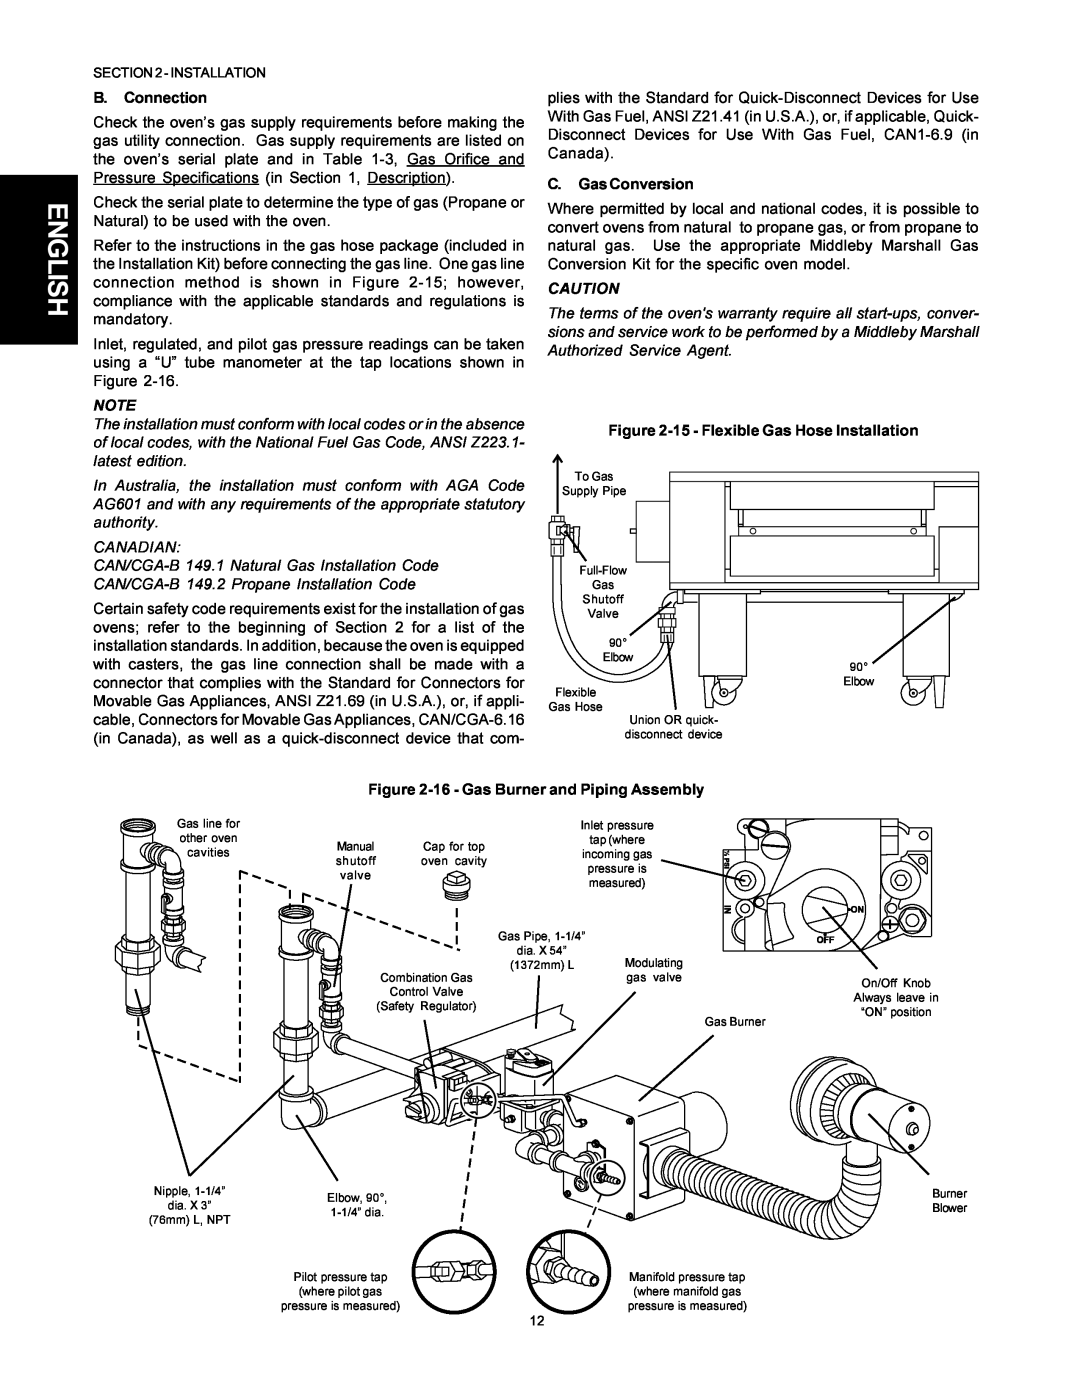 Middleby Marshall PS500 installation manual English, B. Connection, C. Gas Conversion, 15 - Flexible Gas Hose Installation 